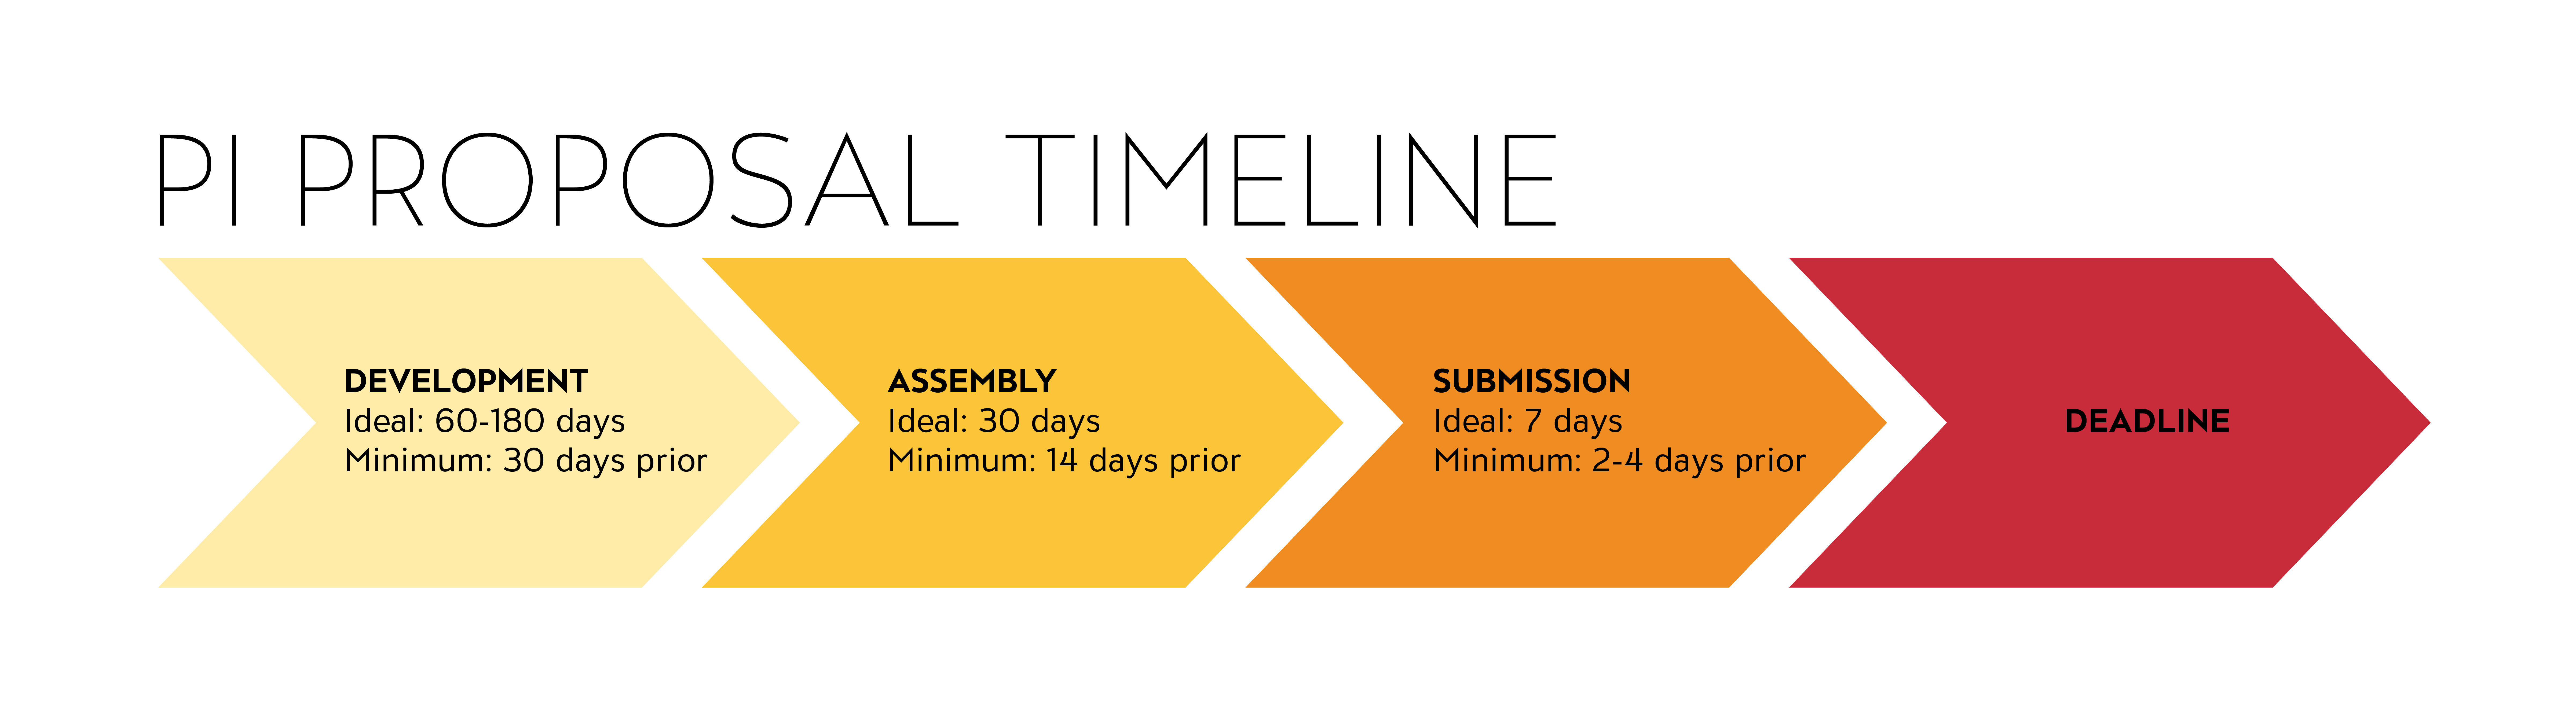 timeline template for research proposal